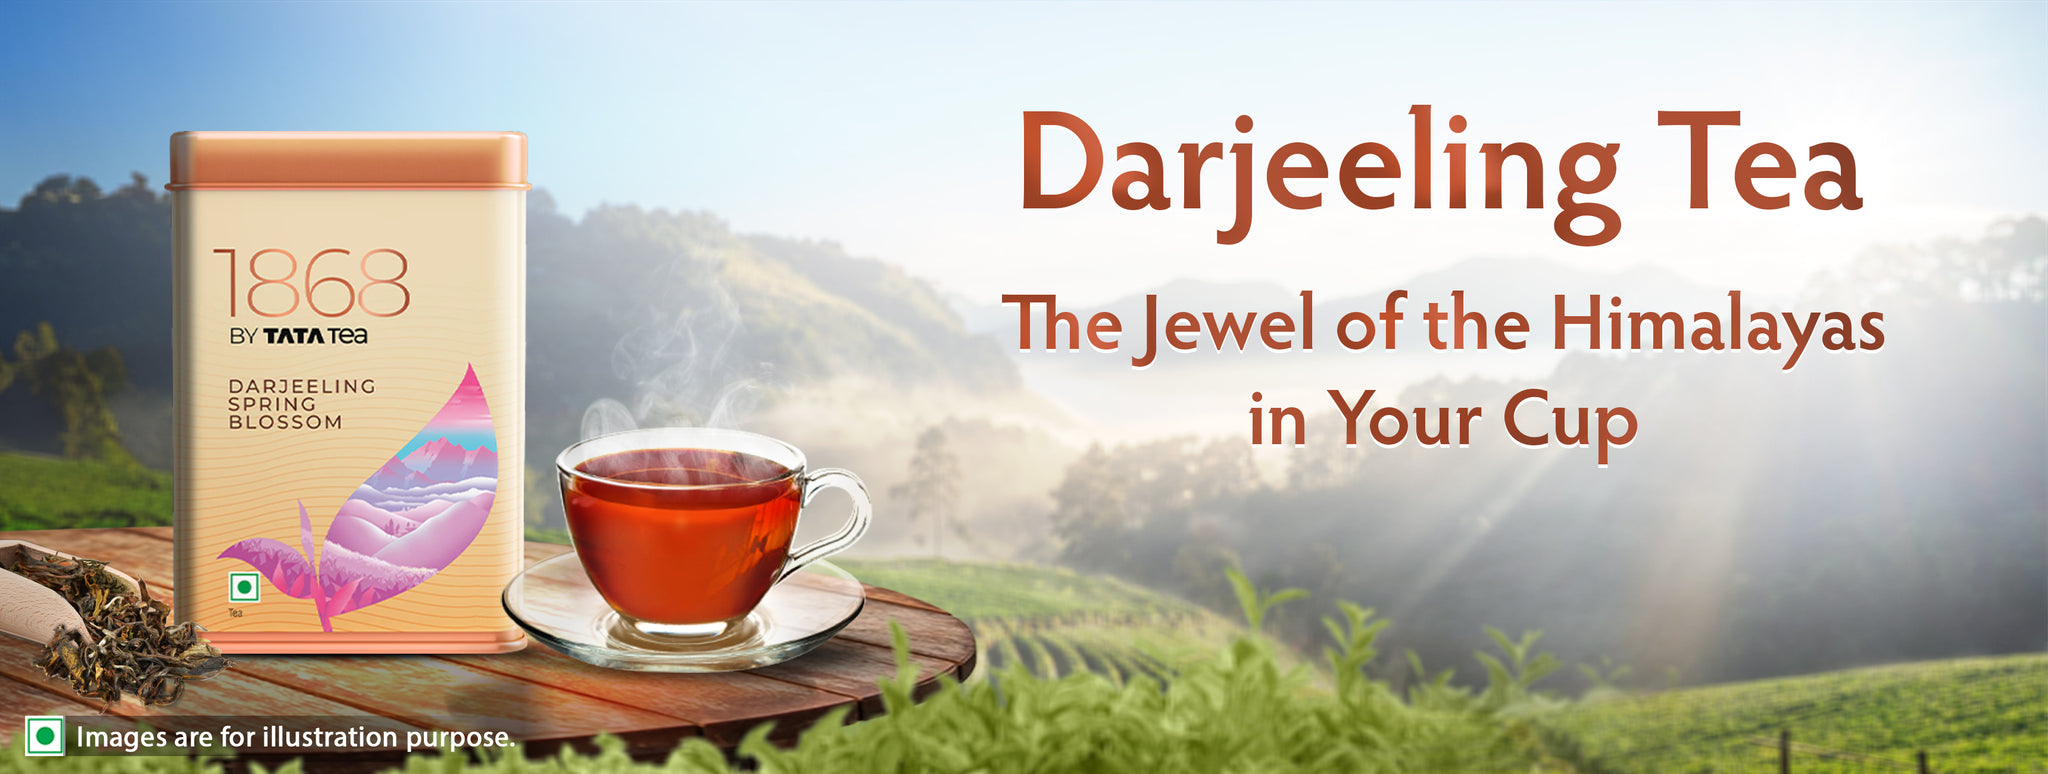 Darjeeling Tea: The Jewel of the Himalayas in Your Cup